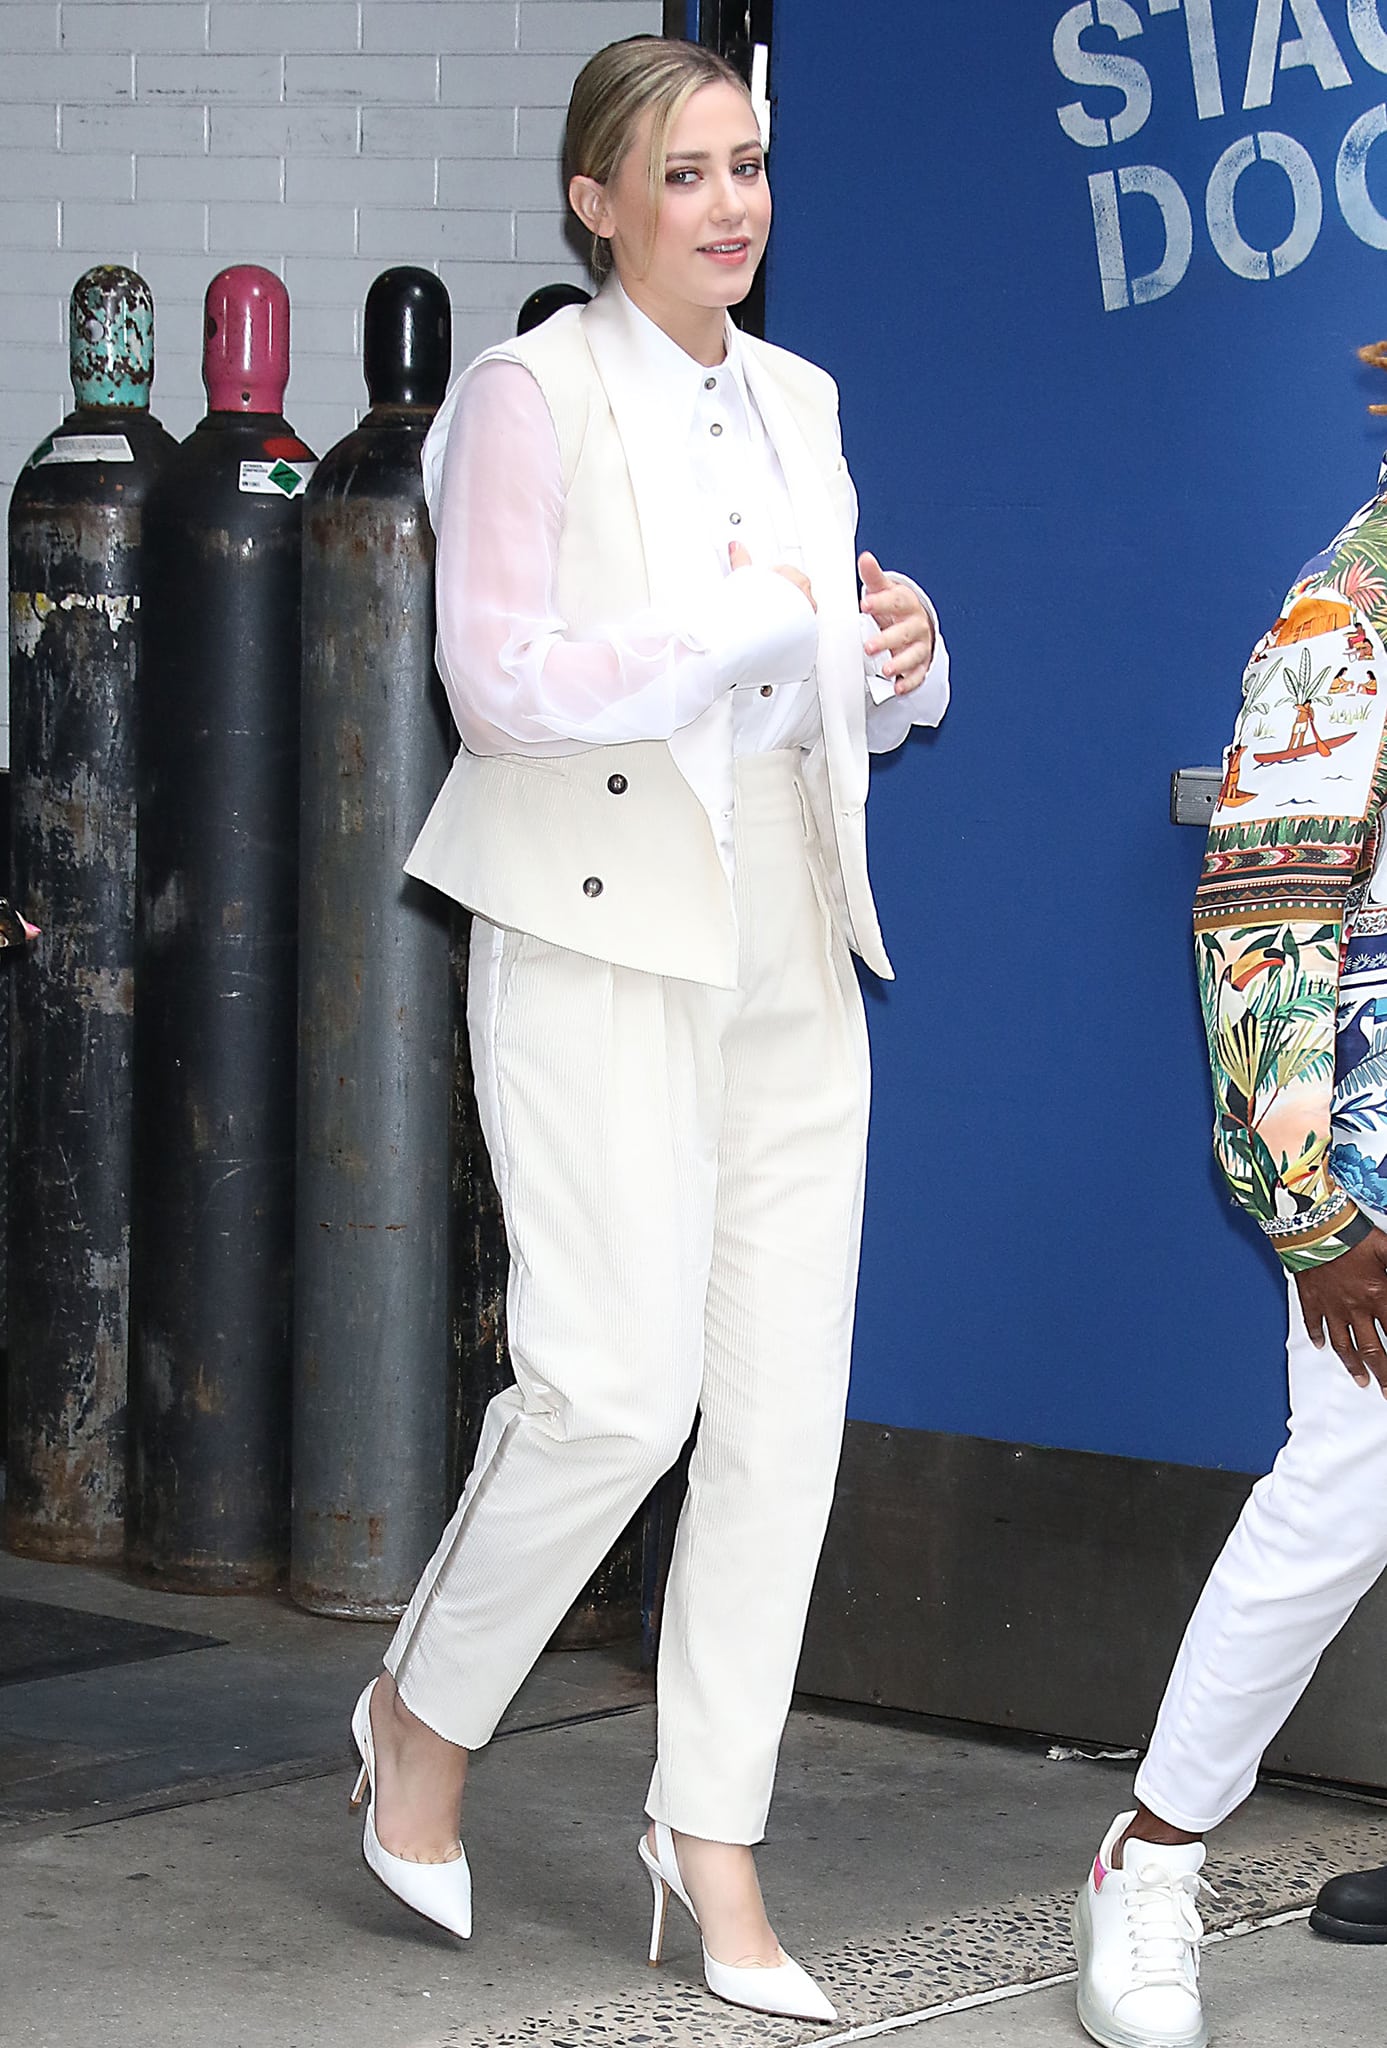 Lili Reinhart looks chic in a white tuxedo suit with a mesh-sleeved blazer and white slingback pumps